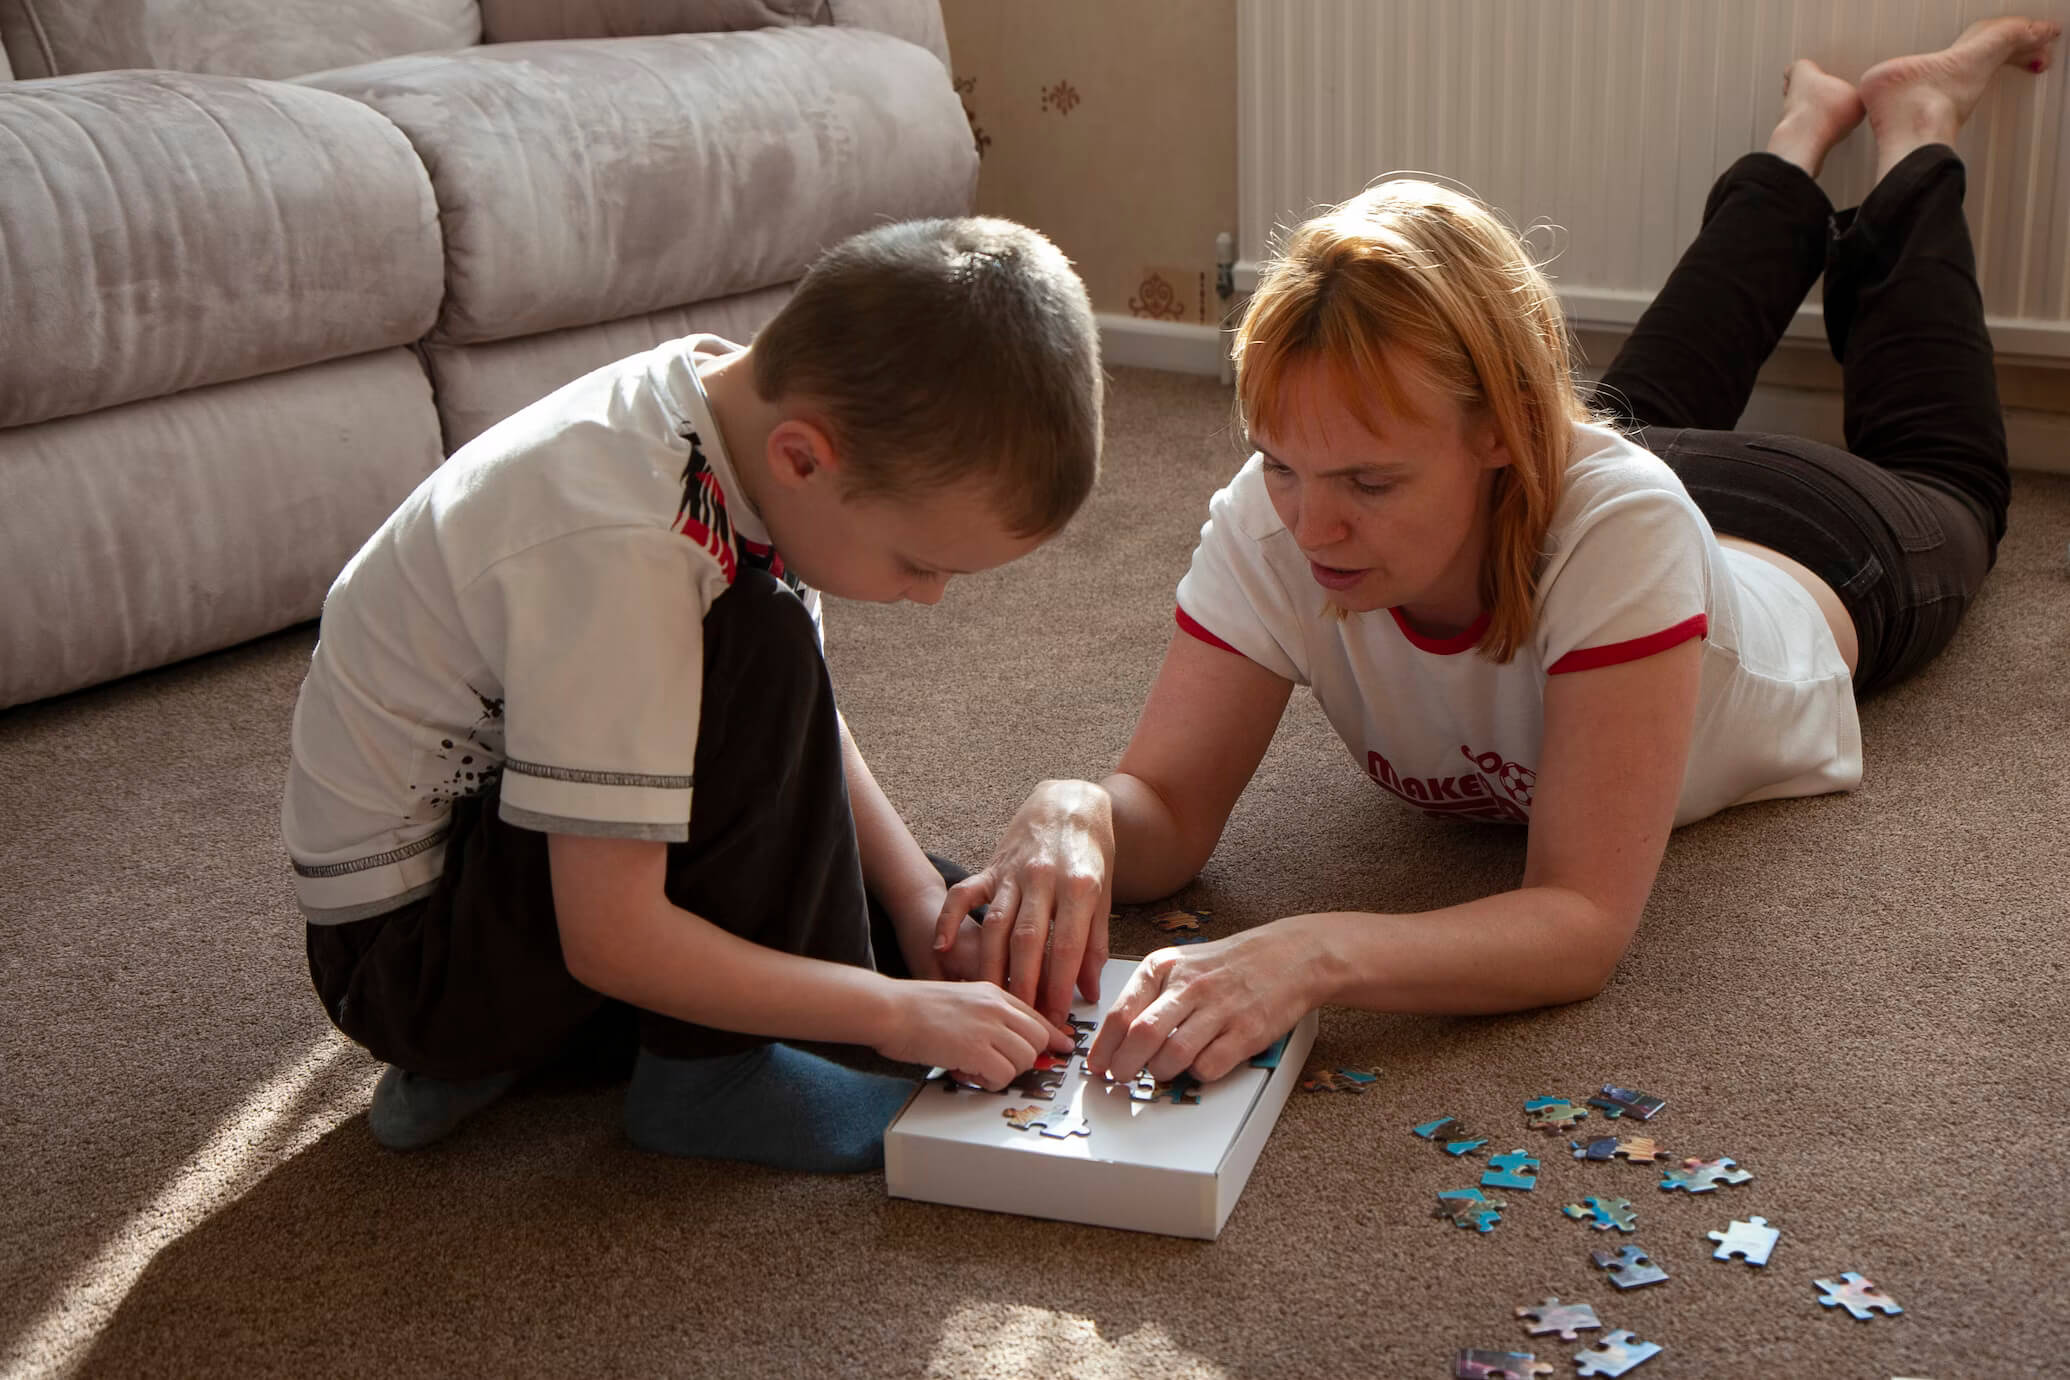 Woman and a young boy sat on living room floor together completing a puzzle.